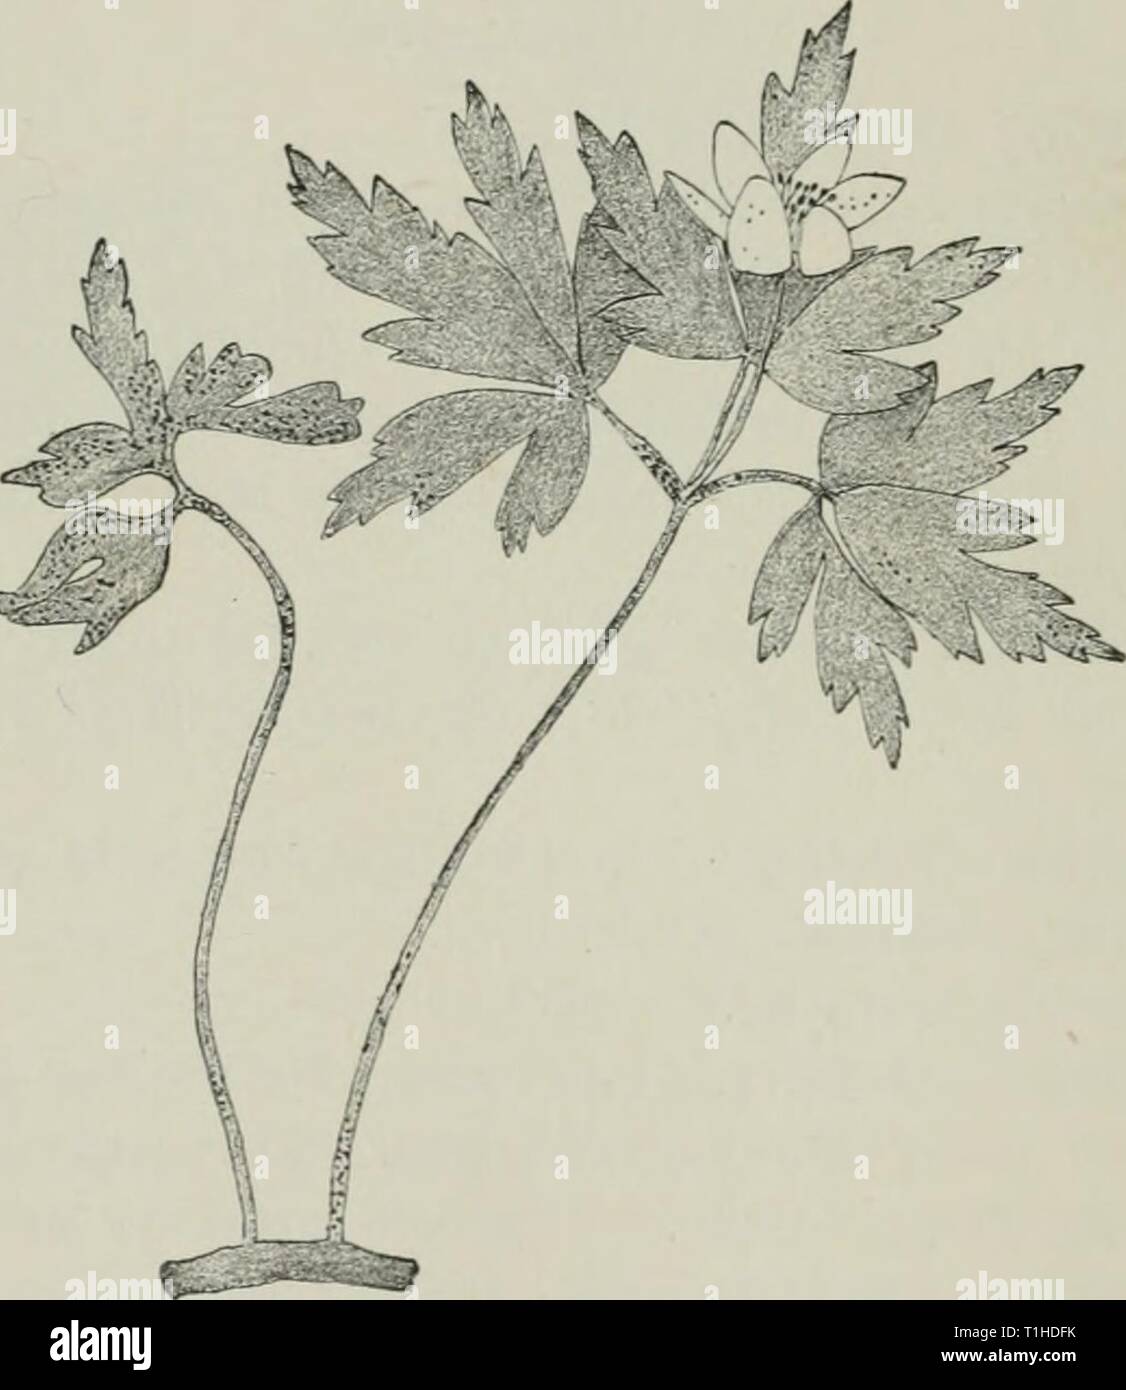 Diseases of plants induced by Diseases of plants induced by cryptogamic parasites; introduction to the study of pathogenic Fungi, slime-Fungi, bacteria, & Algae  diseasesofplant00tube Year: 1897  112 I'lIYCOMYCETKS. on Stems, Hovver-stalks, radical and cauline leaves, and floral envelopes. Leucochytrium. (1) Forniin; simple vesicles: S. punctatum, Schroet. On Gayea pratcmis. S. rubrocinctum, Magnus, forms little red eruptions on Scun- frujja (jraiiuhitii, the cell-sap of the host-plant becoming red. S. alpinum, Thomas. On Viula hiflora. . S. anomalum, Schroet. (U. S. America). On Adoxa Moscha- Stock Photo